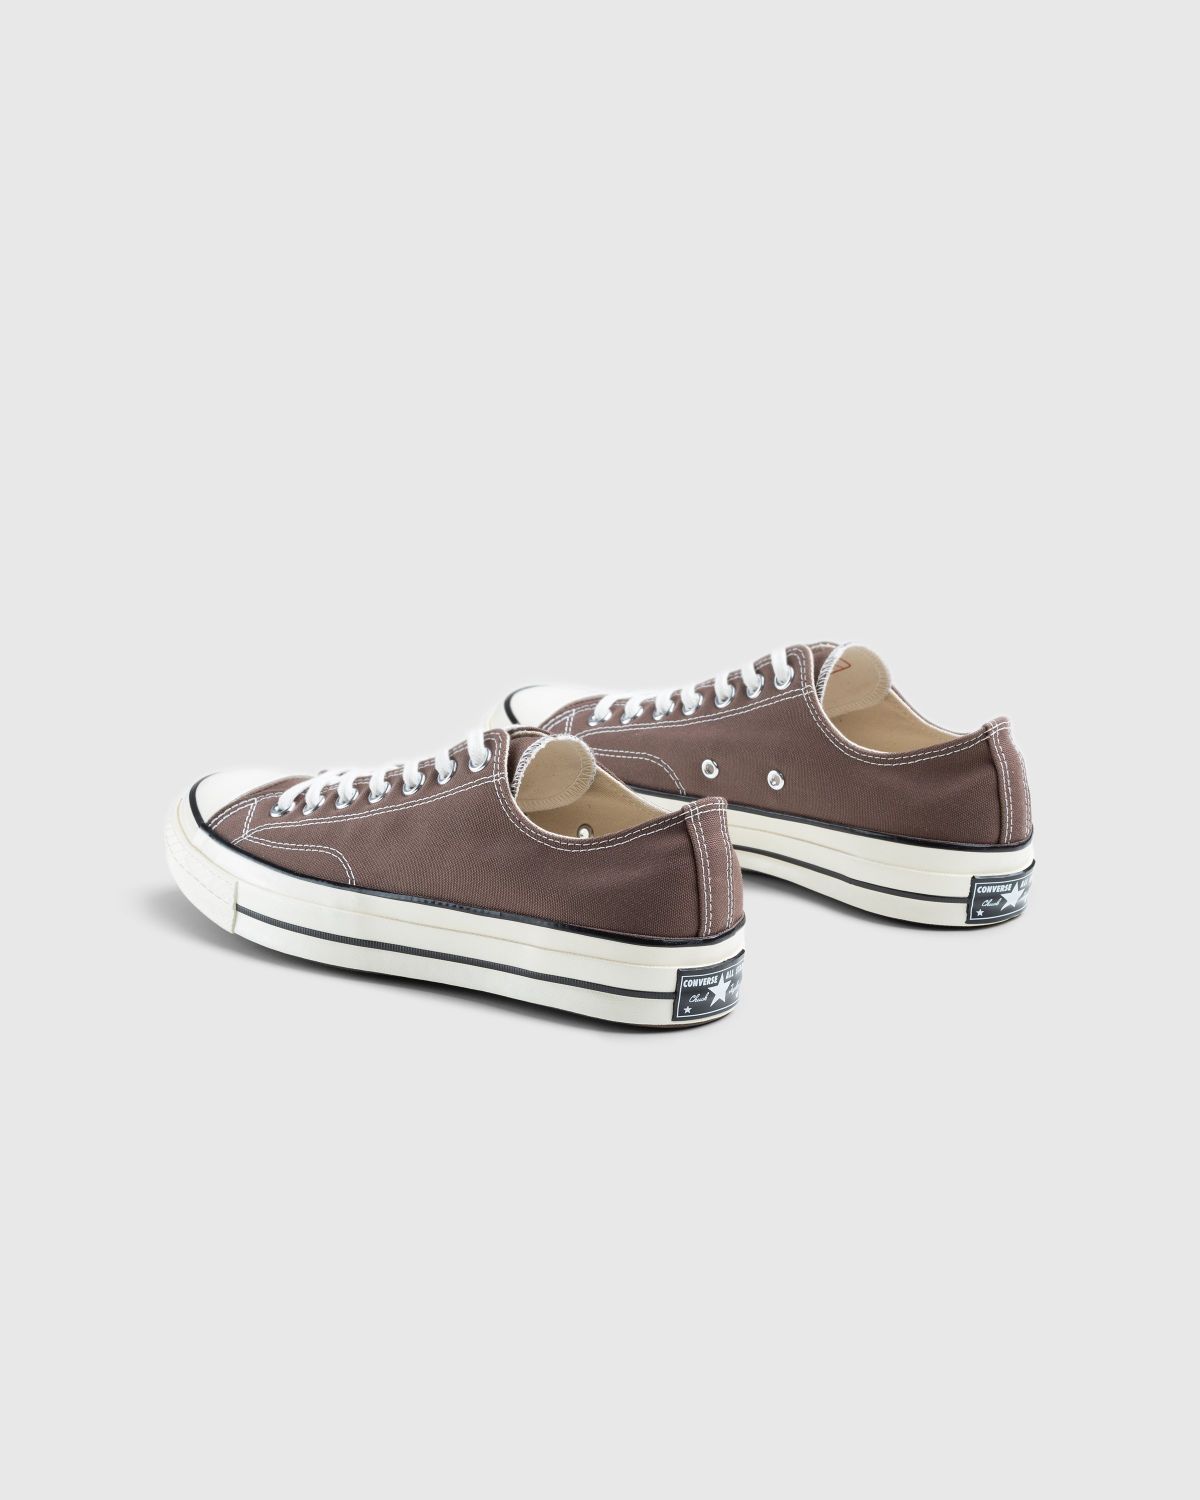 Converse – Chuck 70 Ox Squirrel Friend/Egret/Black - Low Top Sneakers - Brown - Image 4